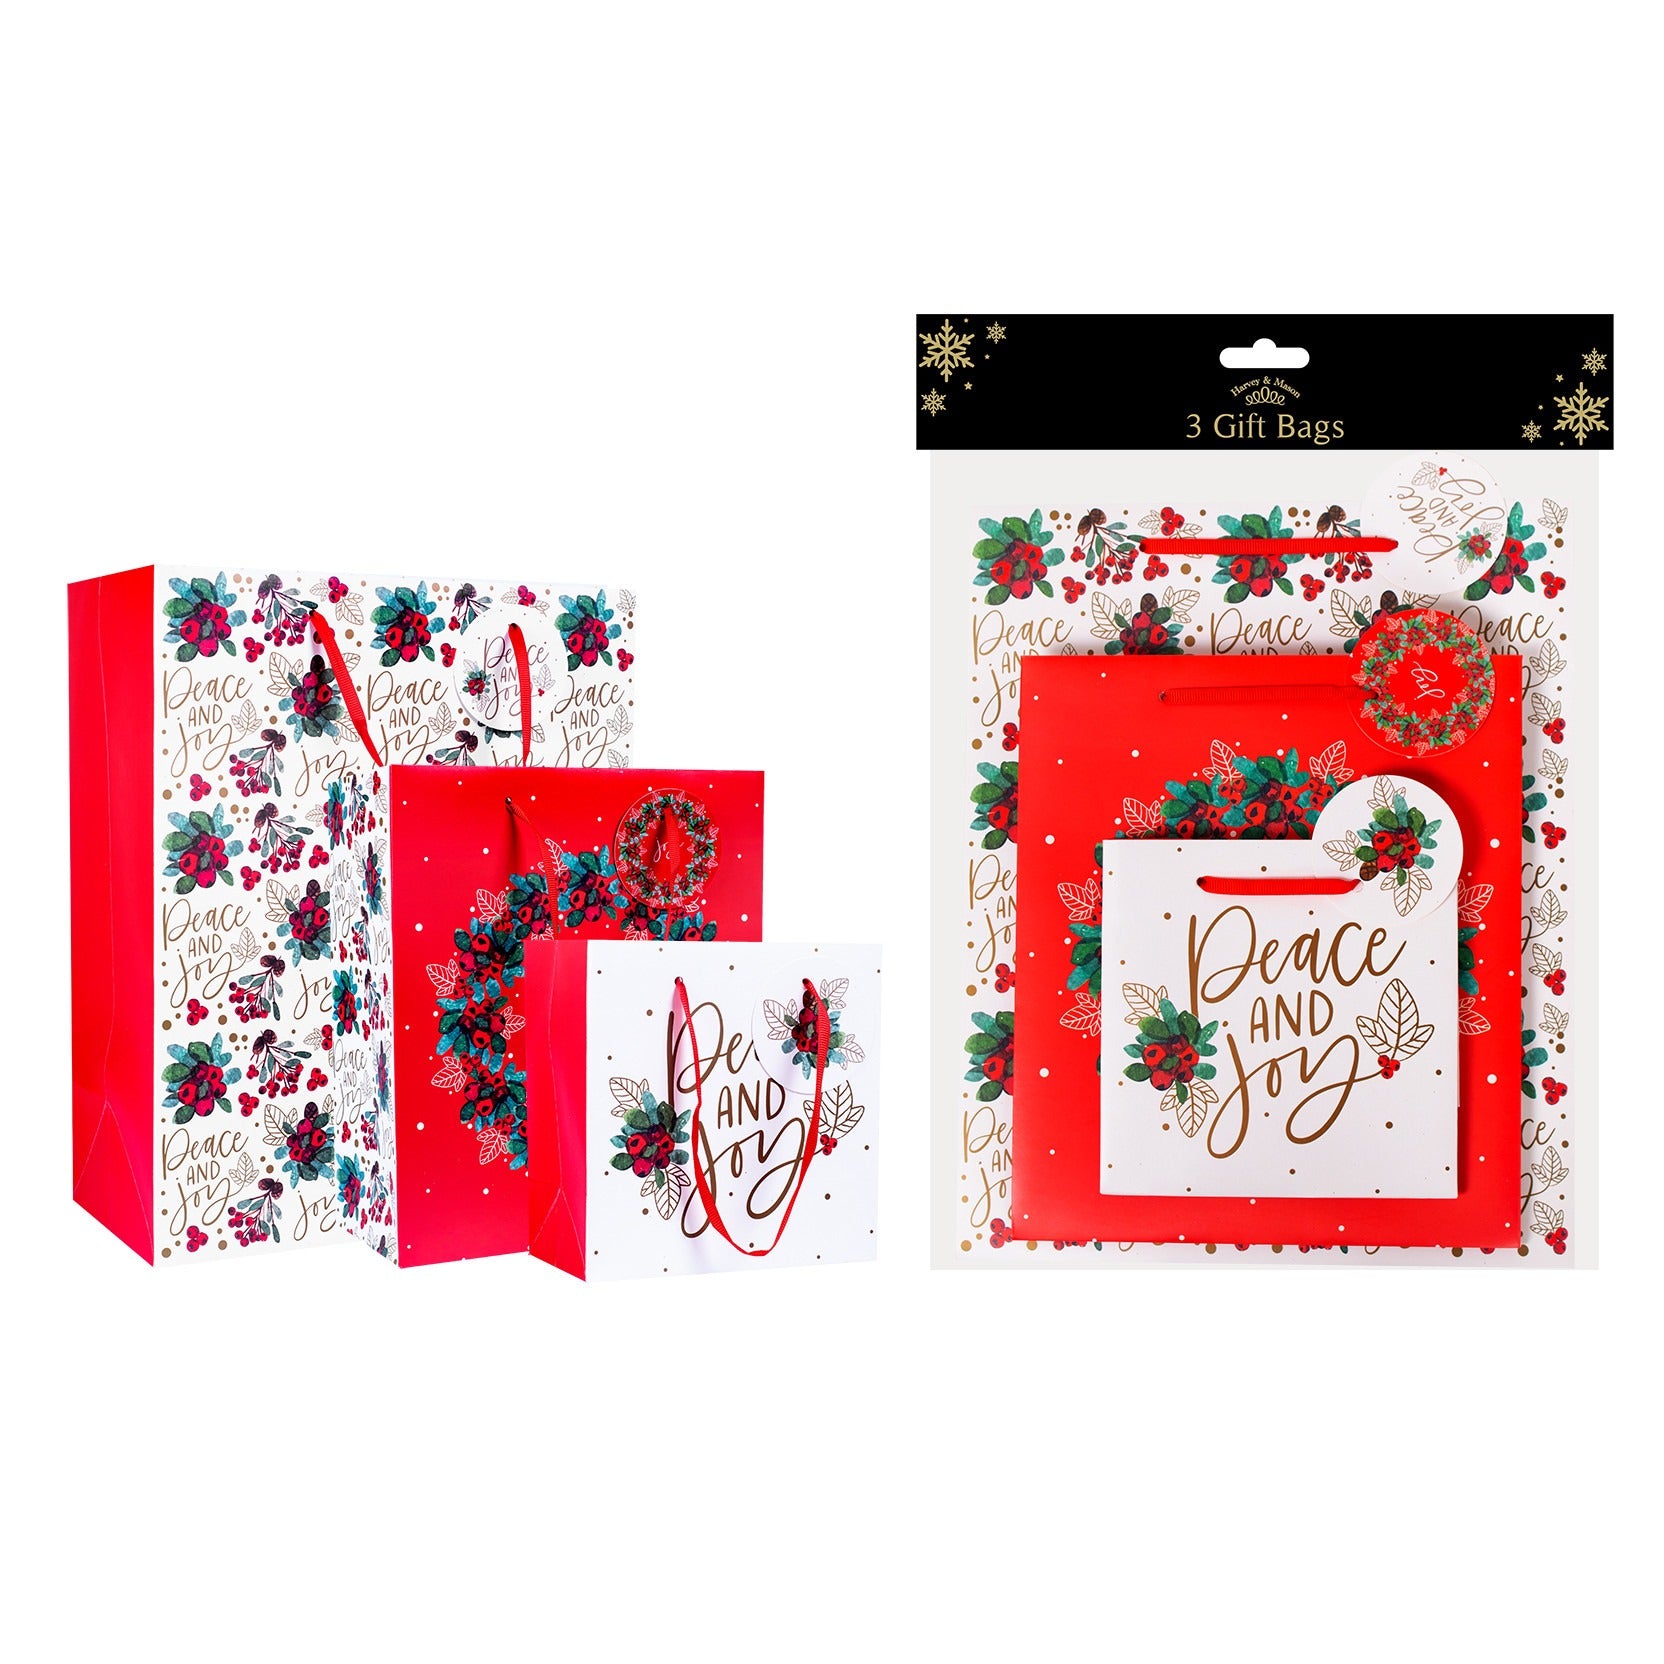 View Traditional Christmas Gift Bags Pack of 3 information